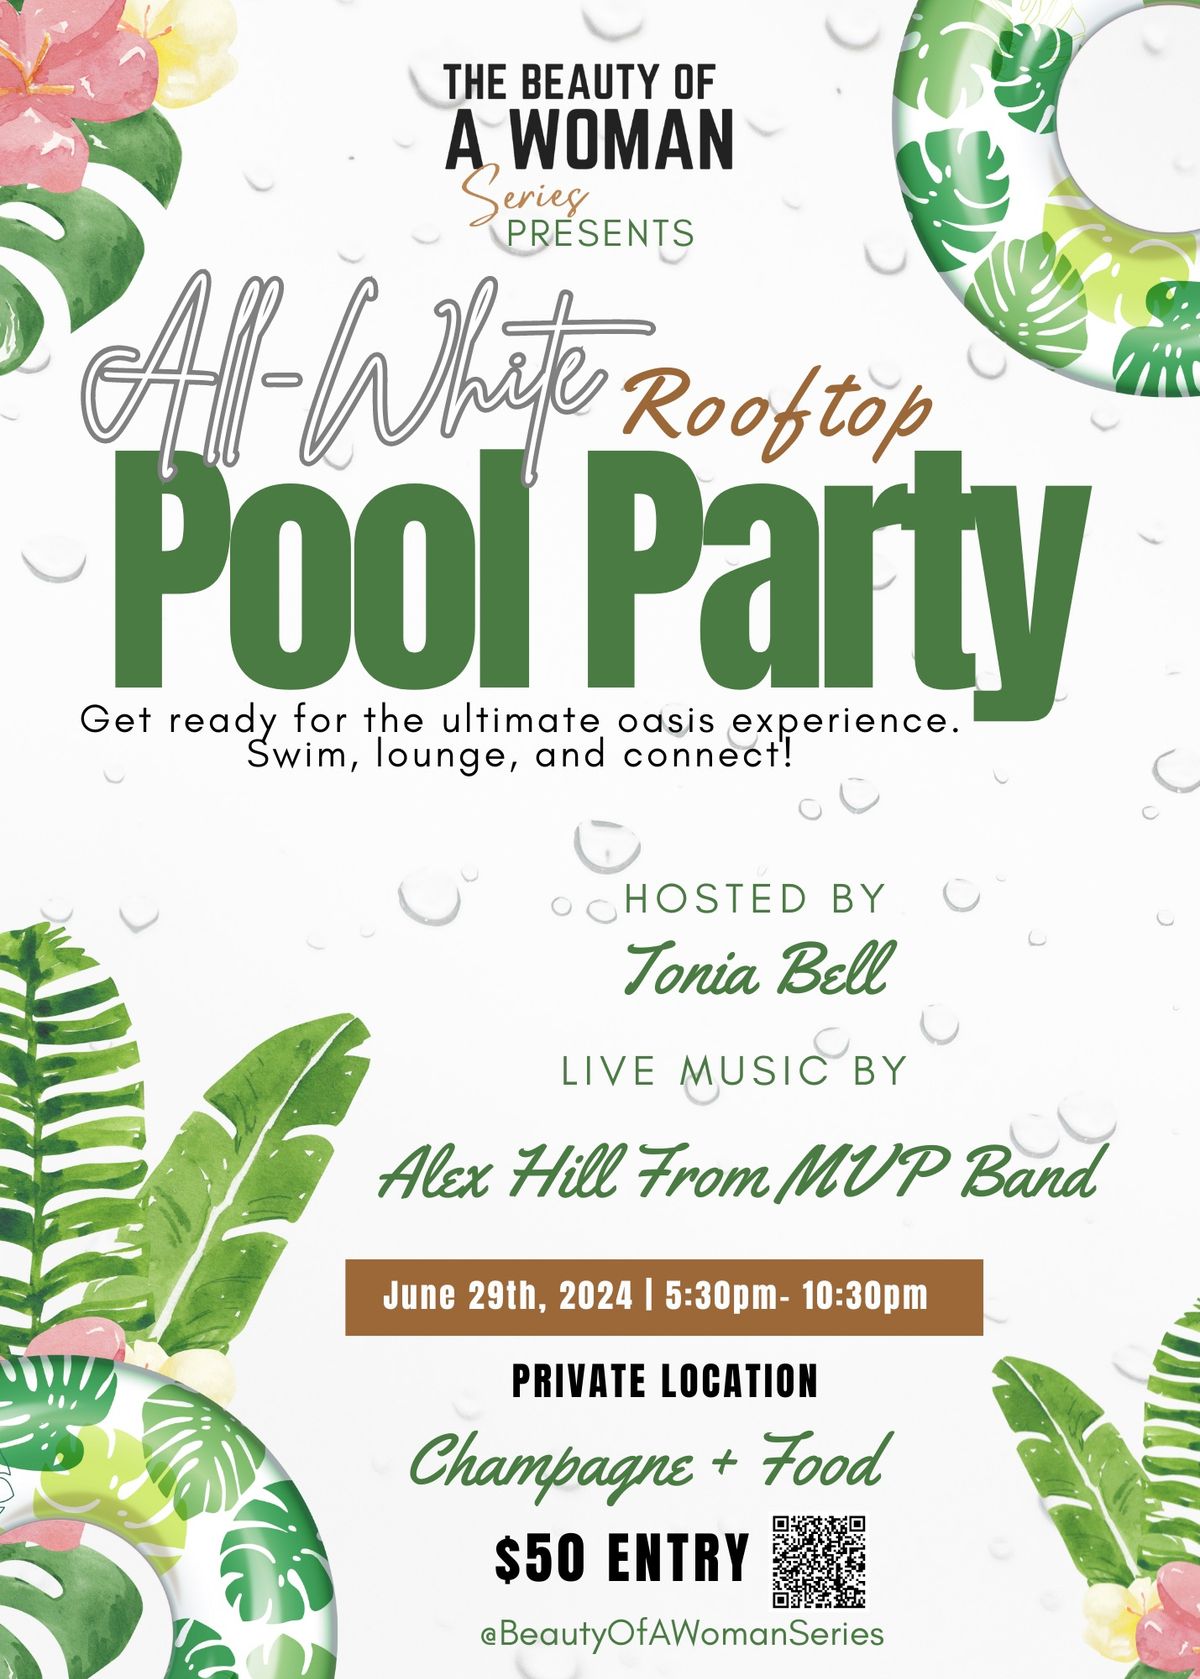 The Beauty Of A Woman Presents: All-White Rooftop Pool Party!